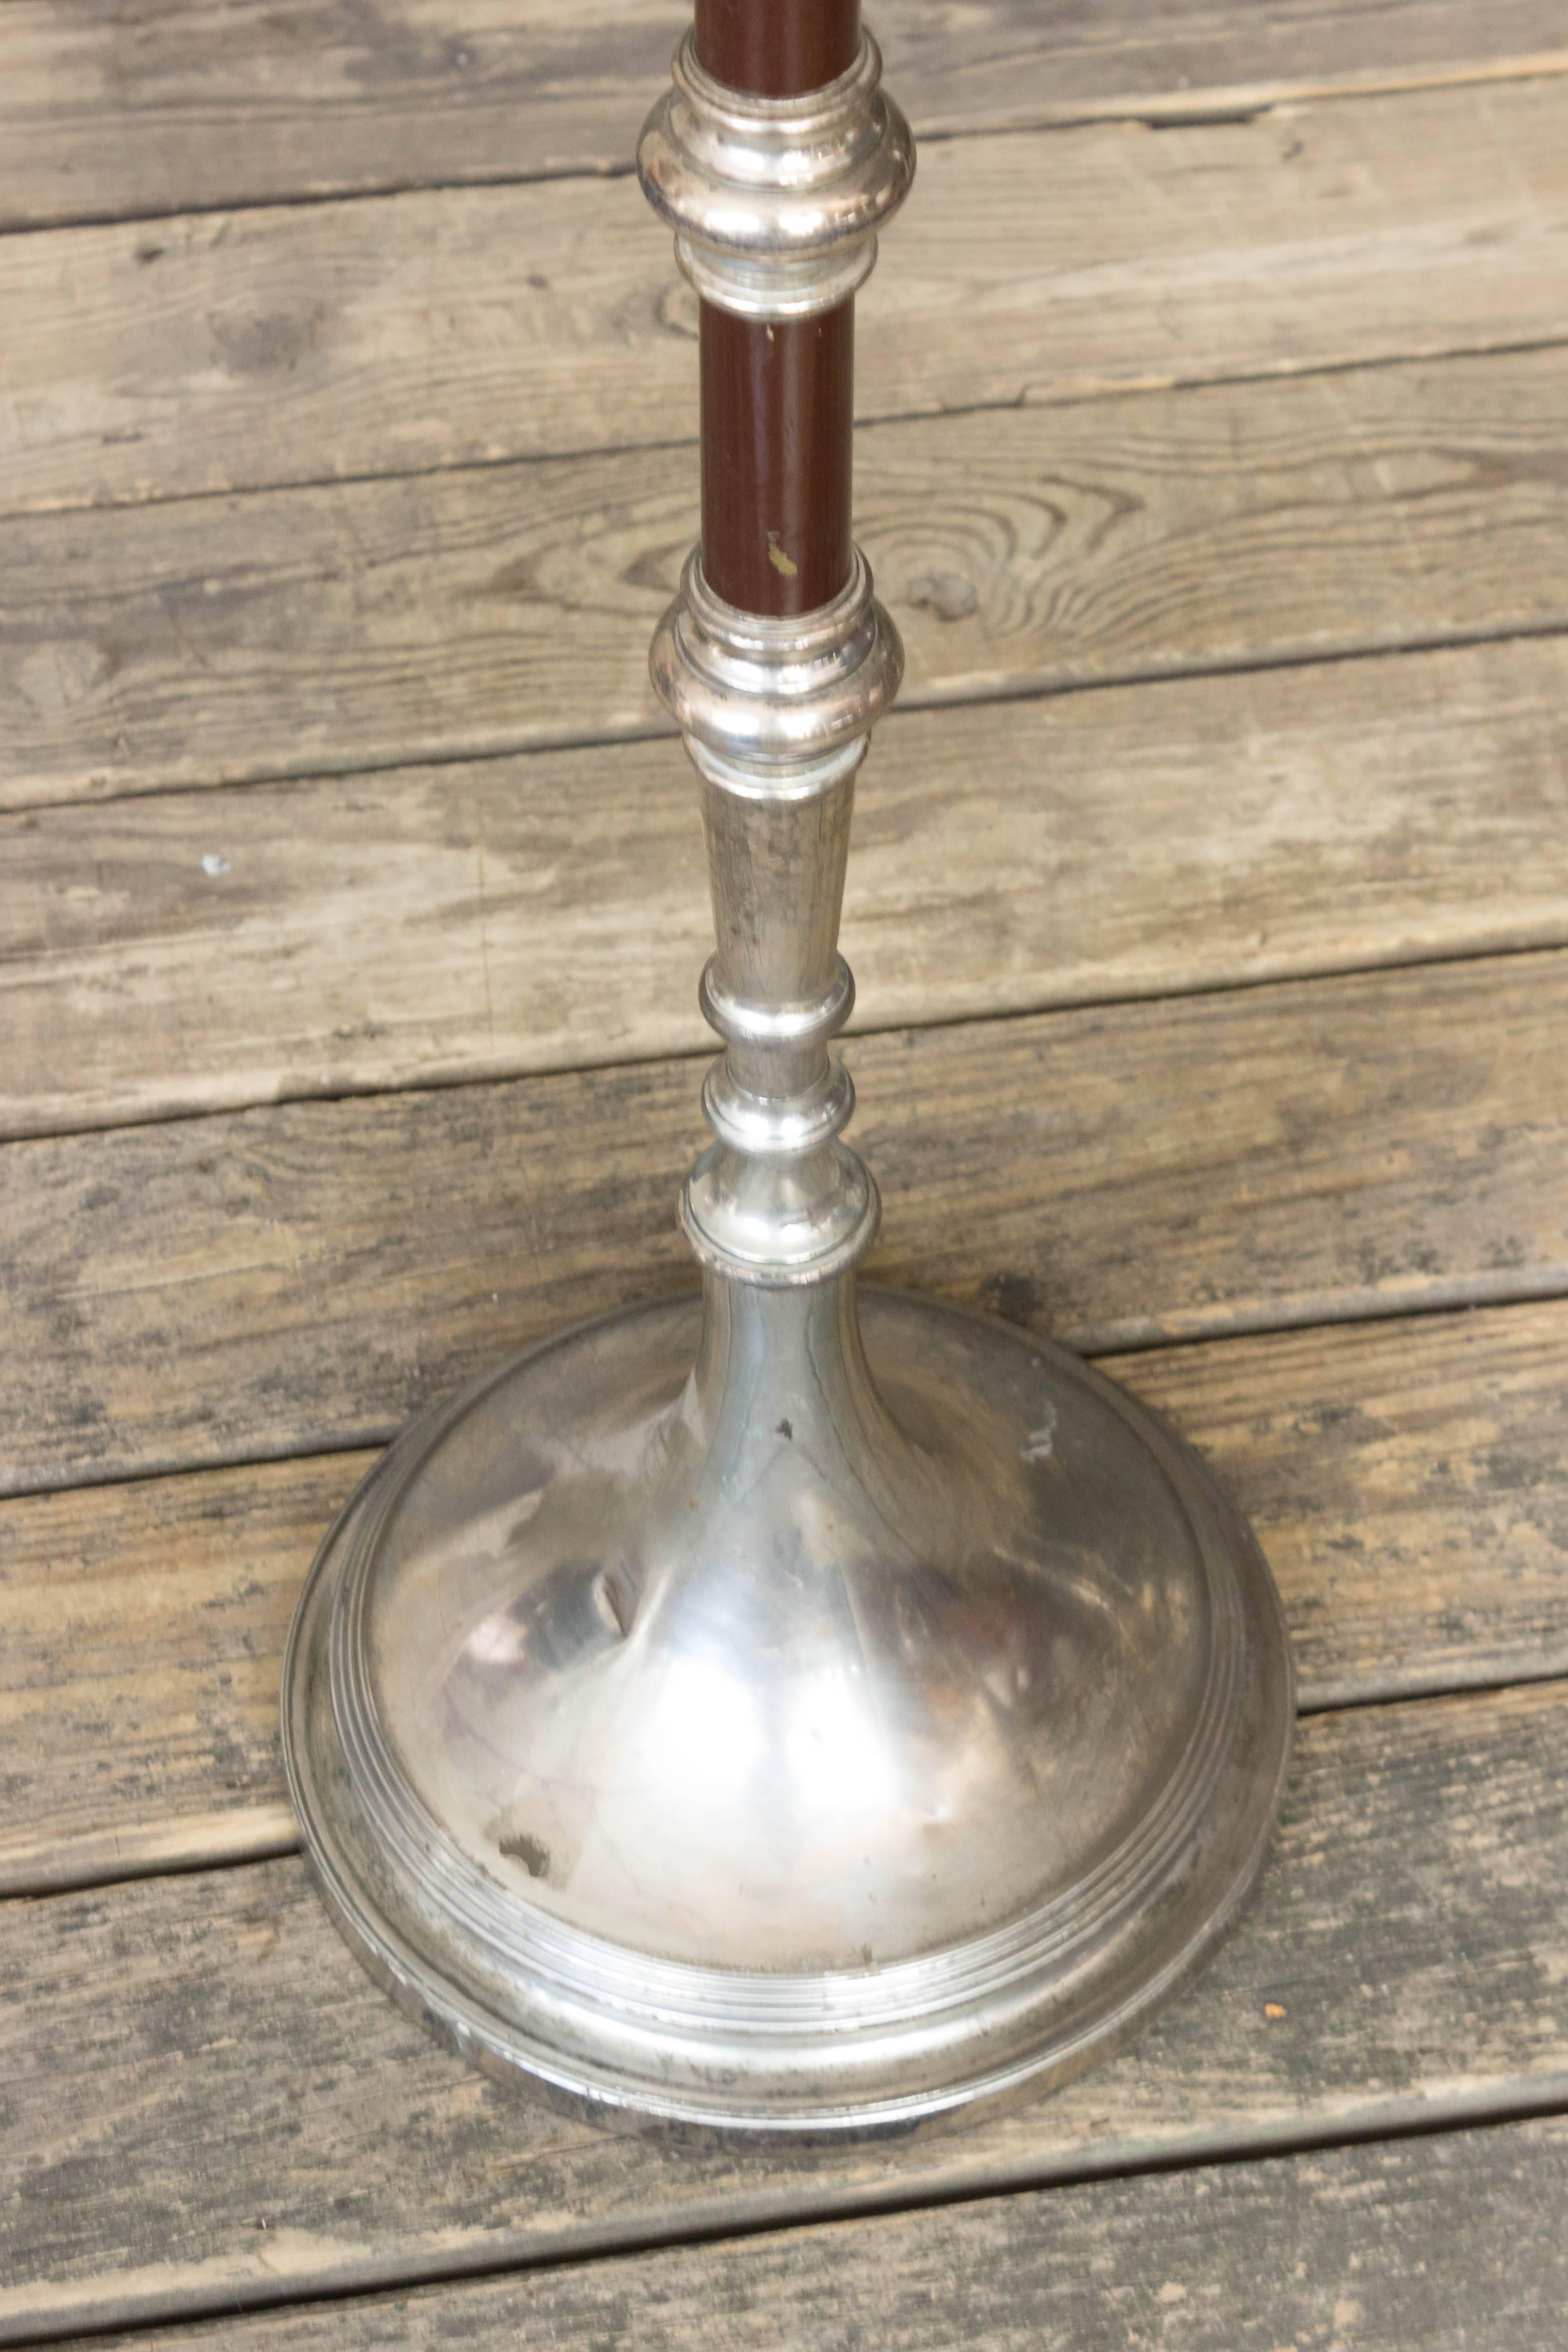 Late 20th Century French Floor Lamp with Alternating Nickel and Colored Sections